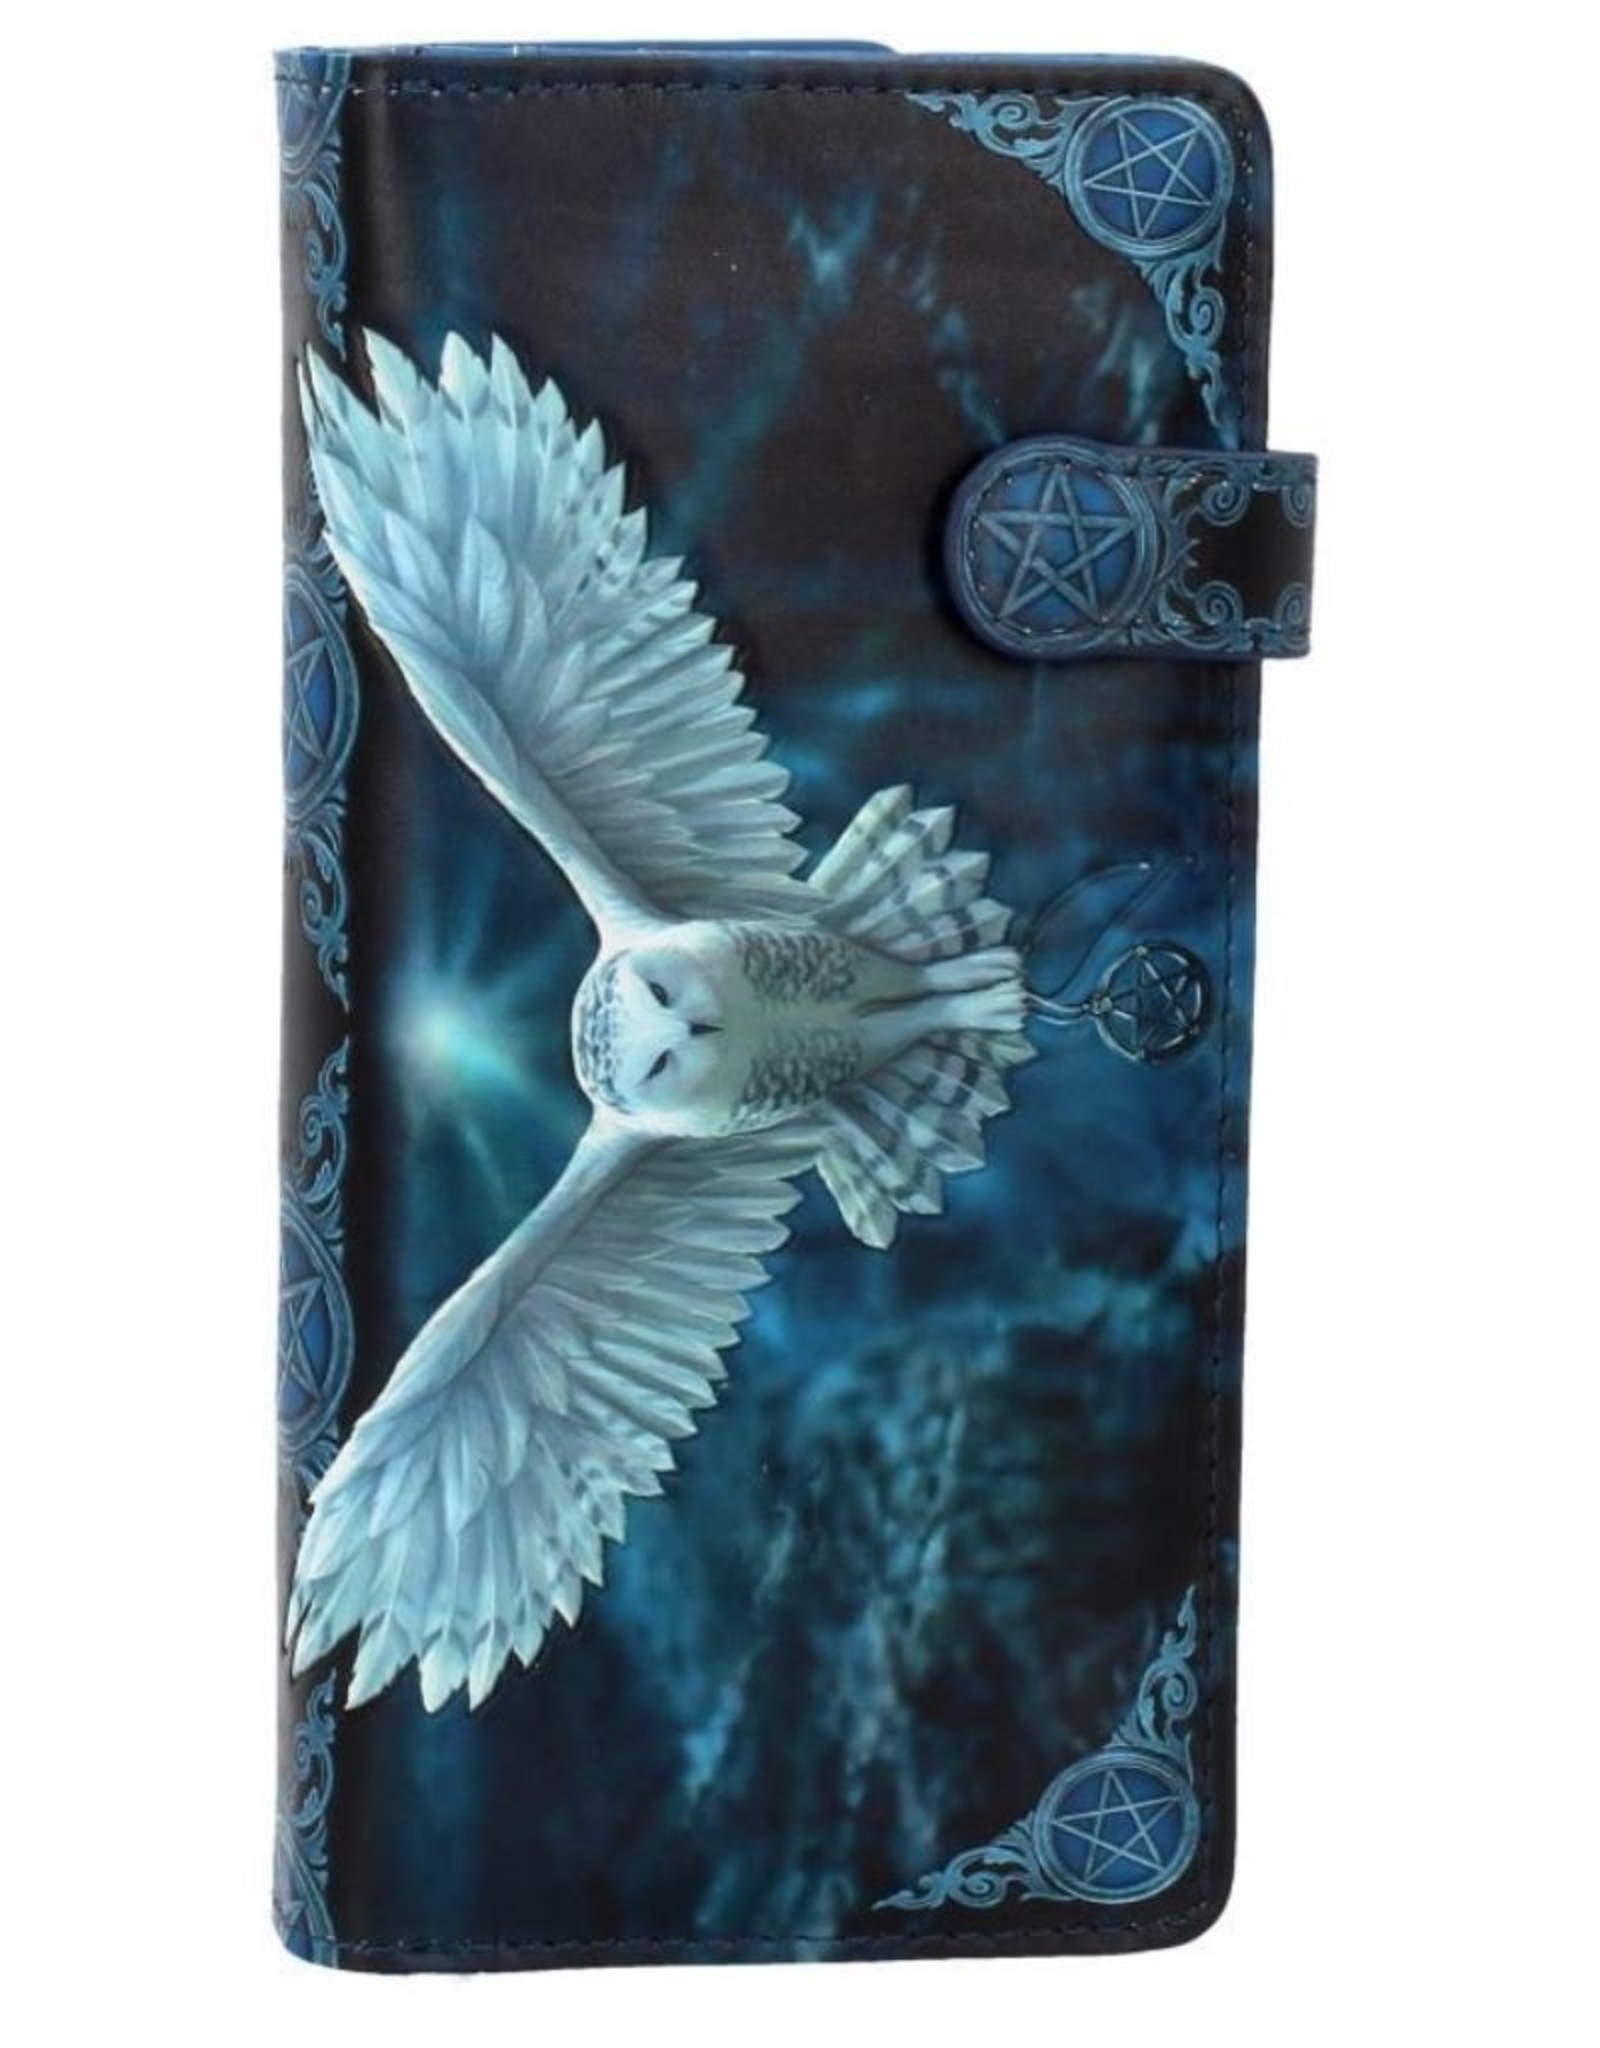 NemesisNow Gothic wallets and purses - Awaken Your Magic Embossed Purse Anne Stokes